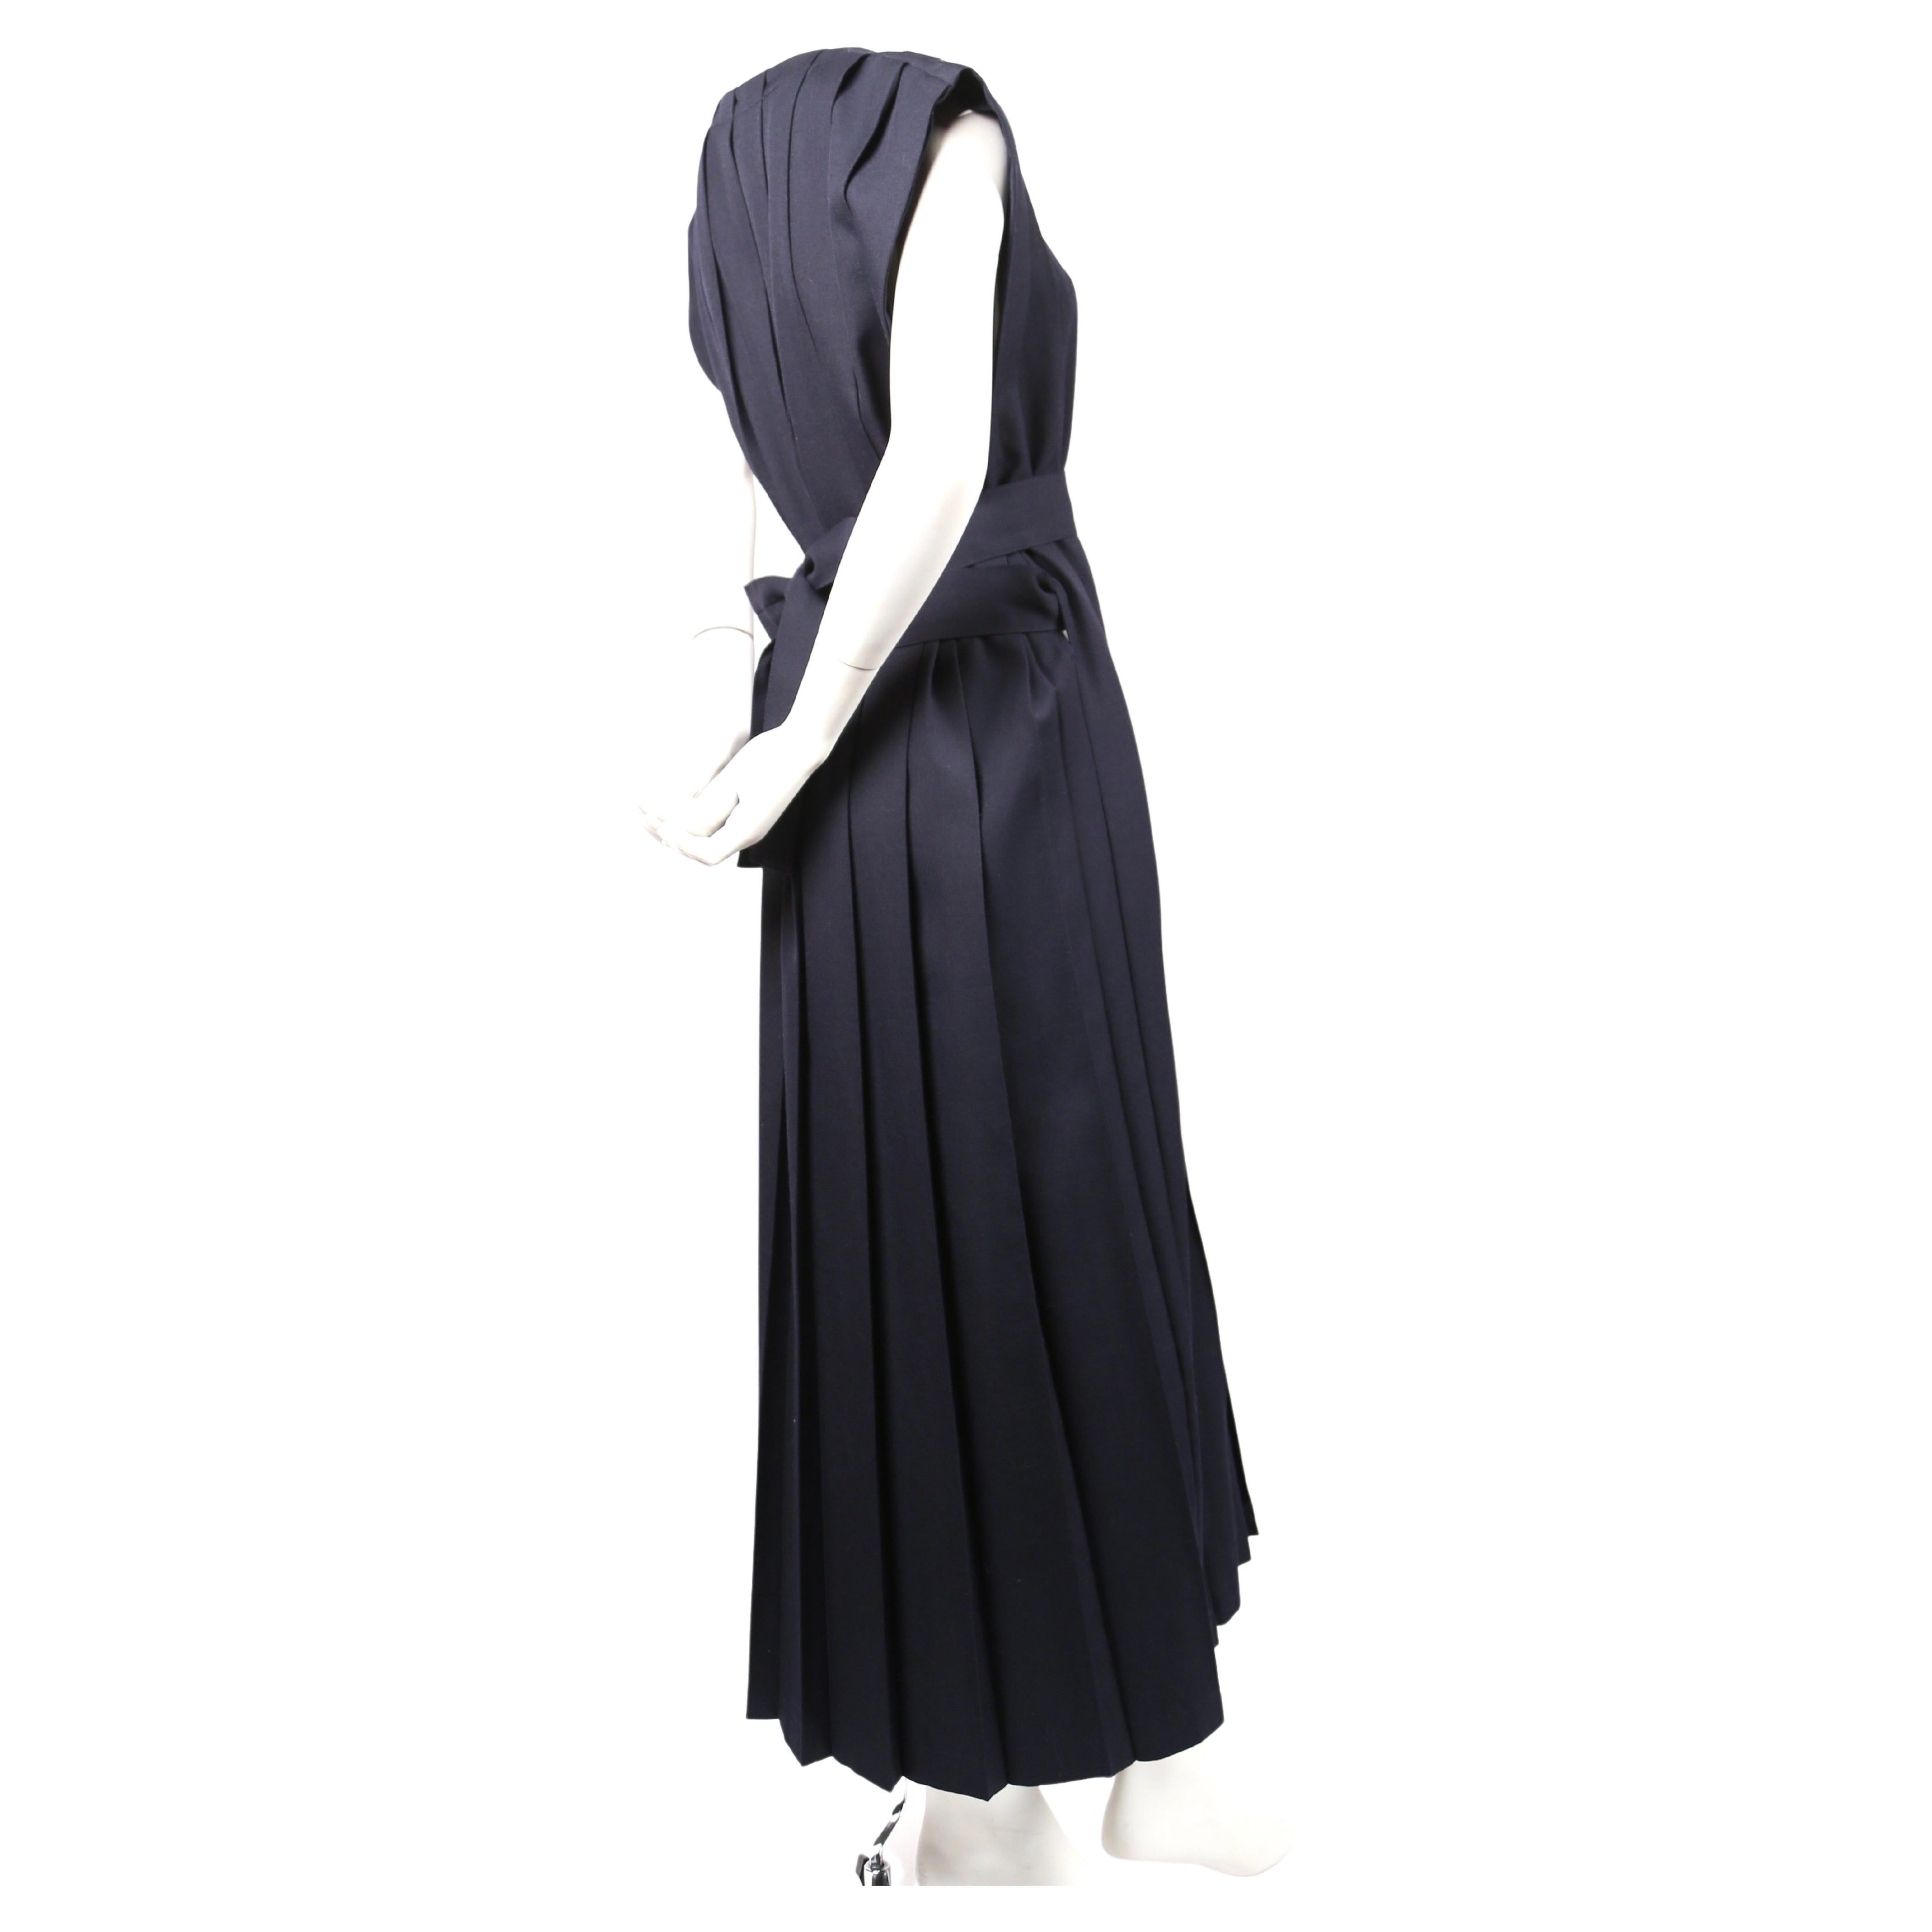 Very rare, navy-blue wool dress with box pleats and long waist tie designed by Rei Kawakubo of Comme des Garcons dating to fall of 1996. No size indicated. Best fits a S or M. Width is adjustable. Approximate length 52